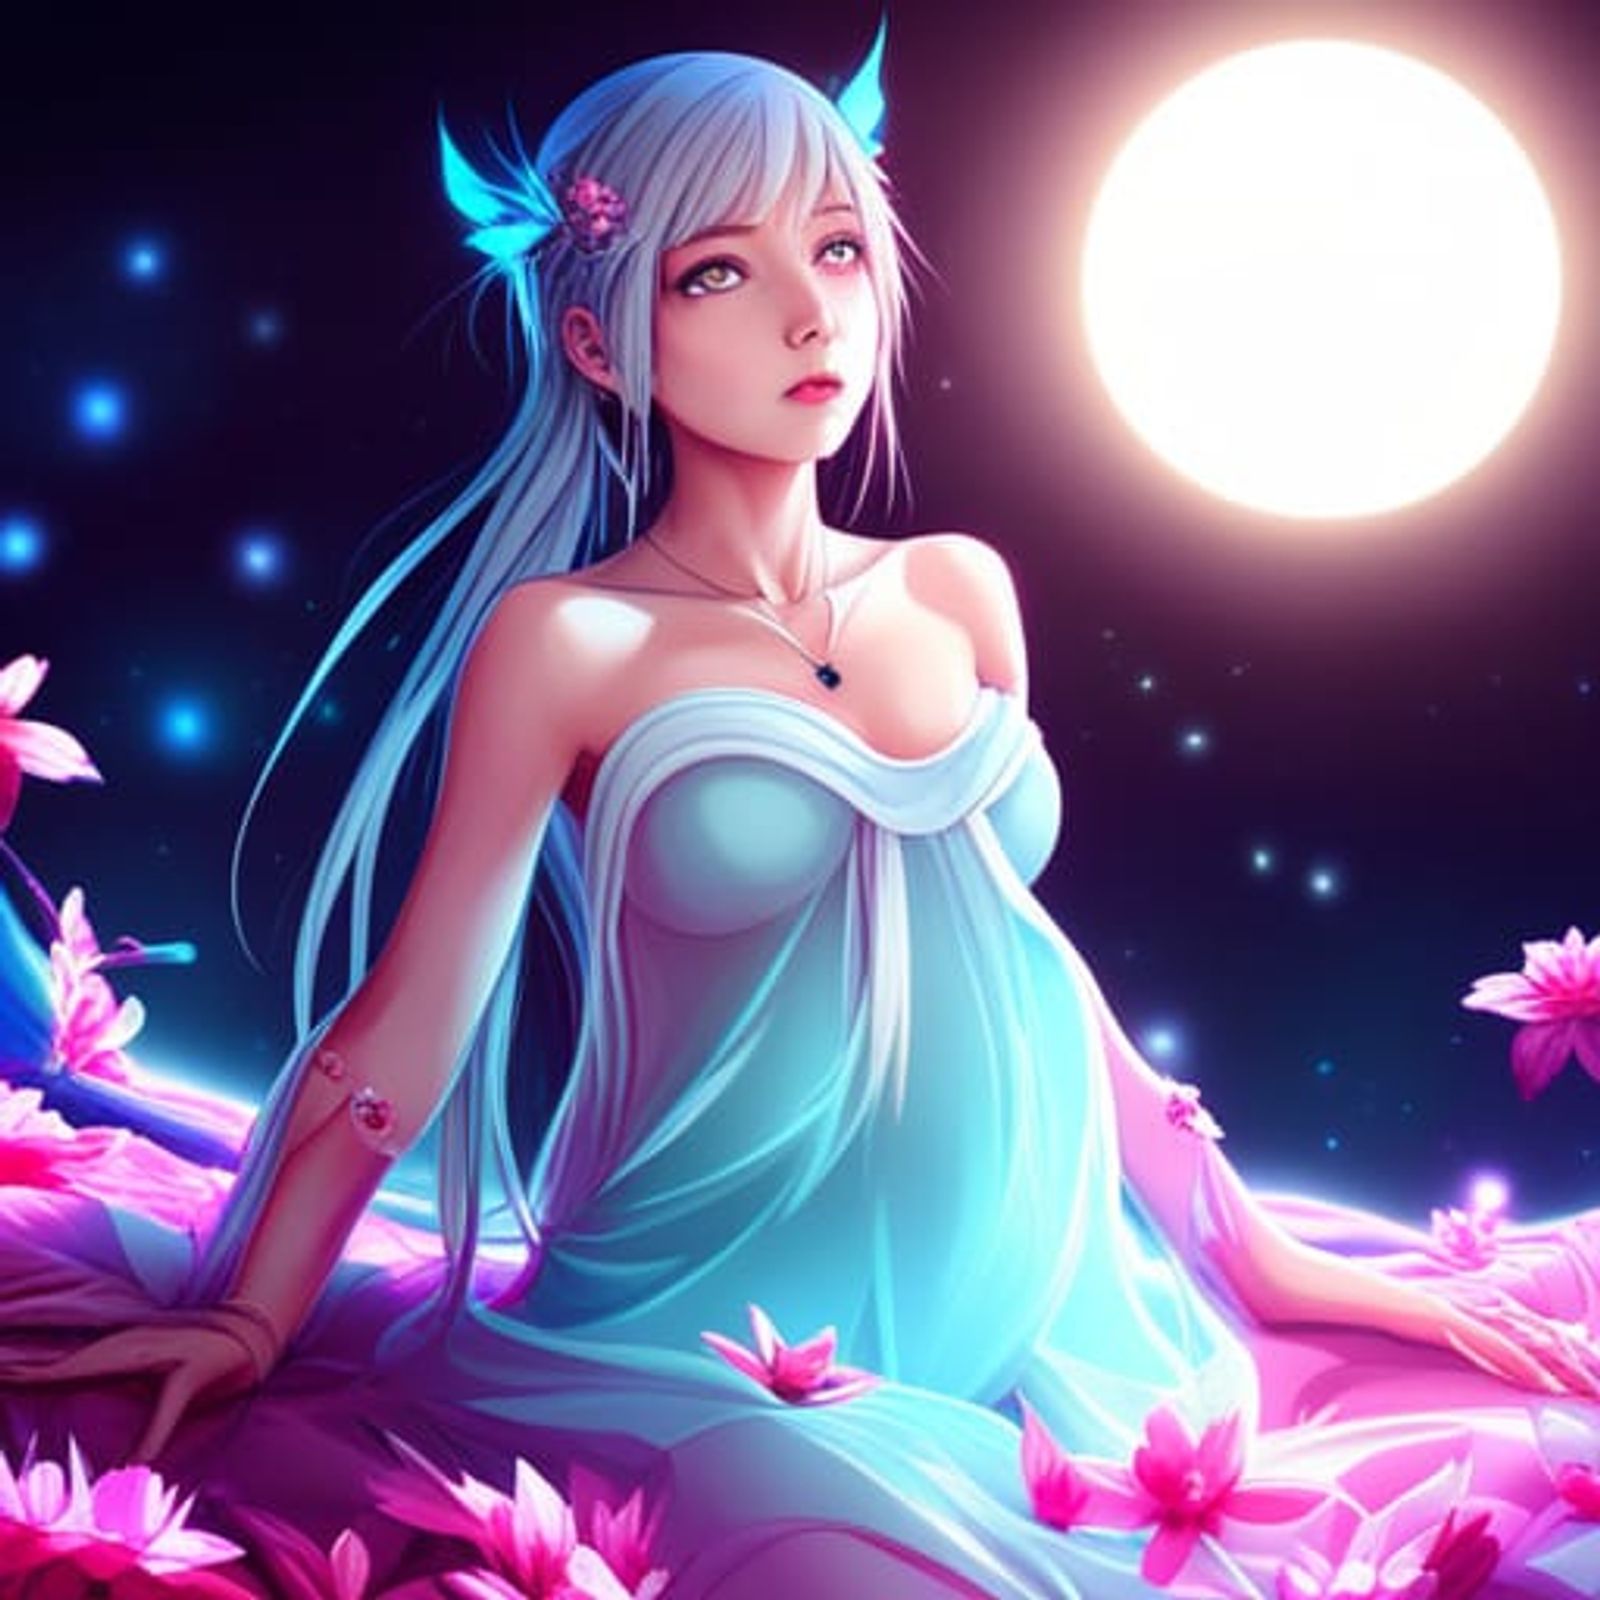 anime girl in water with the moonlight